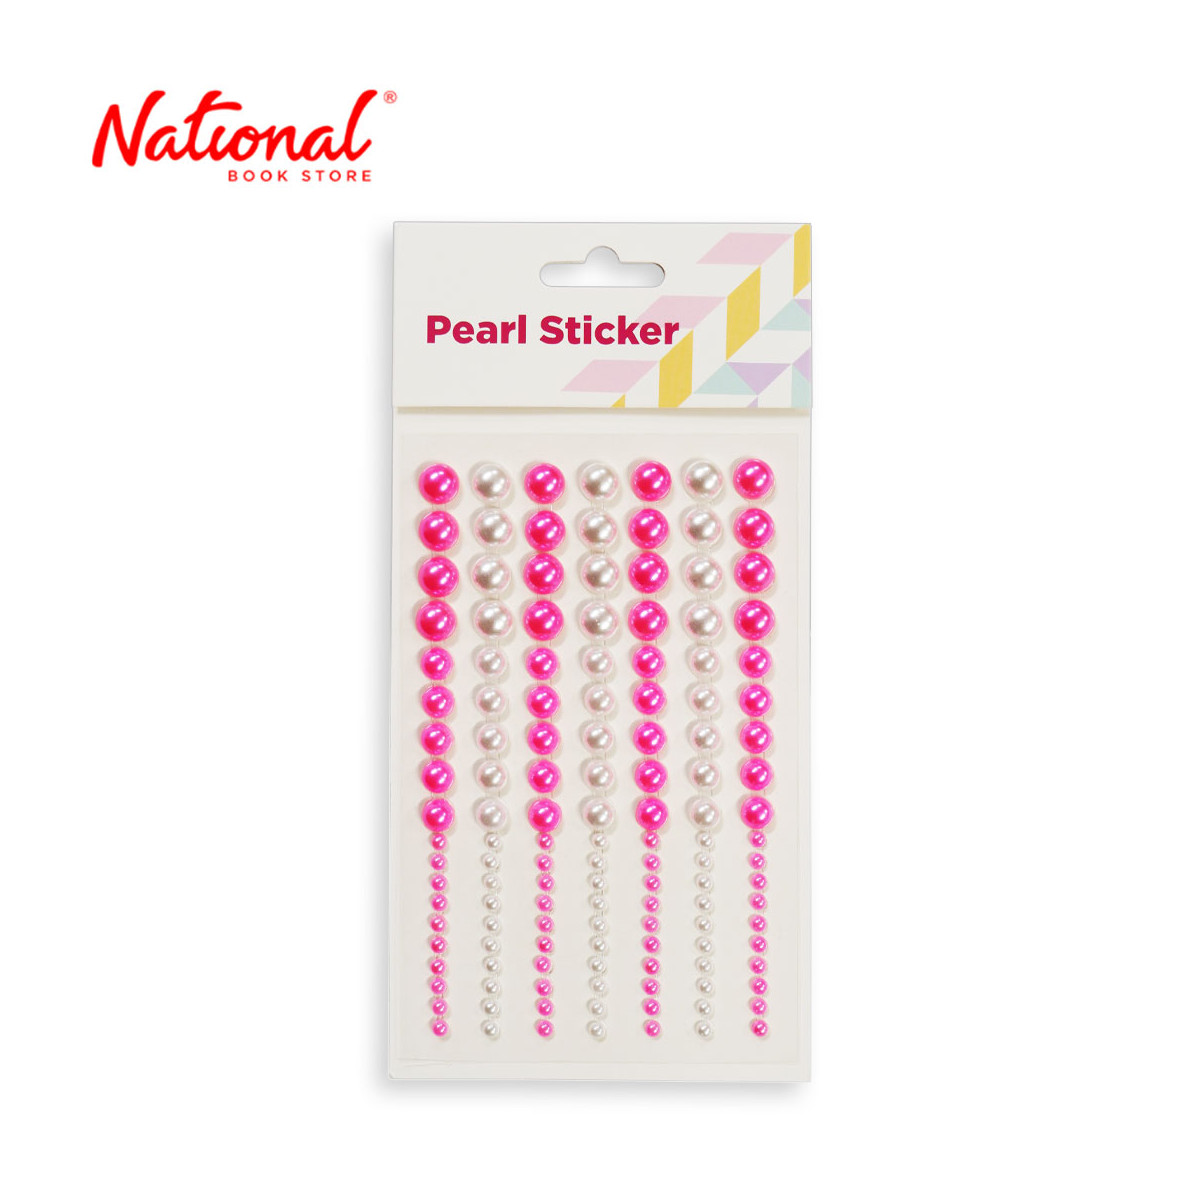 Pearl Sticker ZH-MO100 Pink & White Z6 - Stationery Items - DIY Arts & Crafts